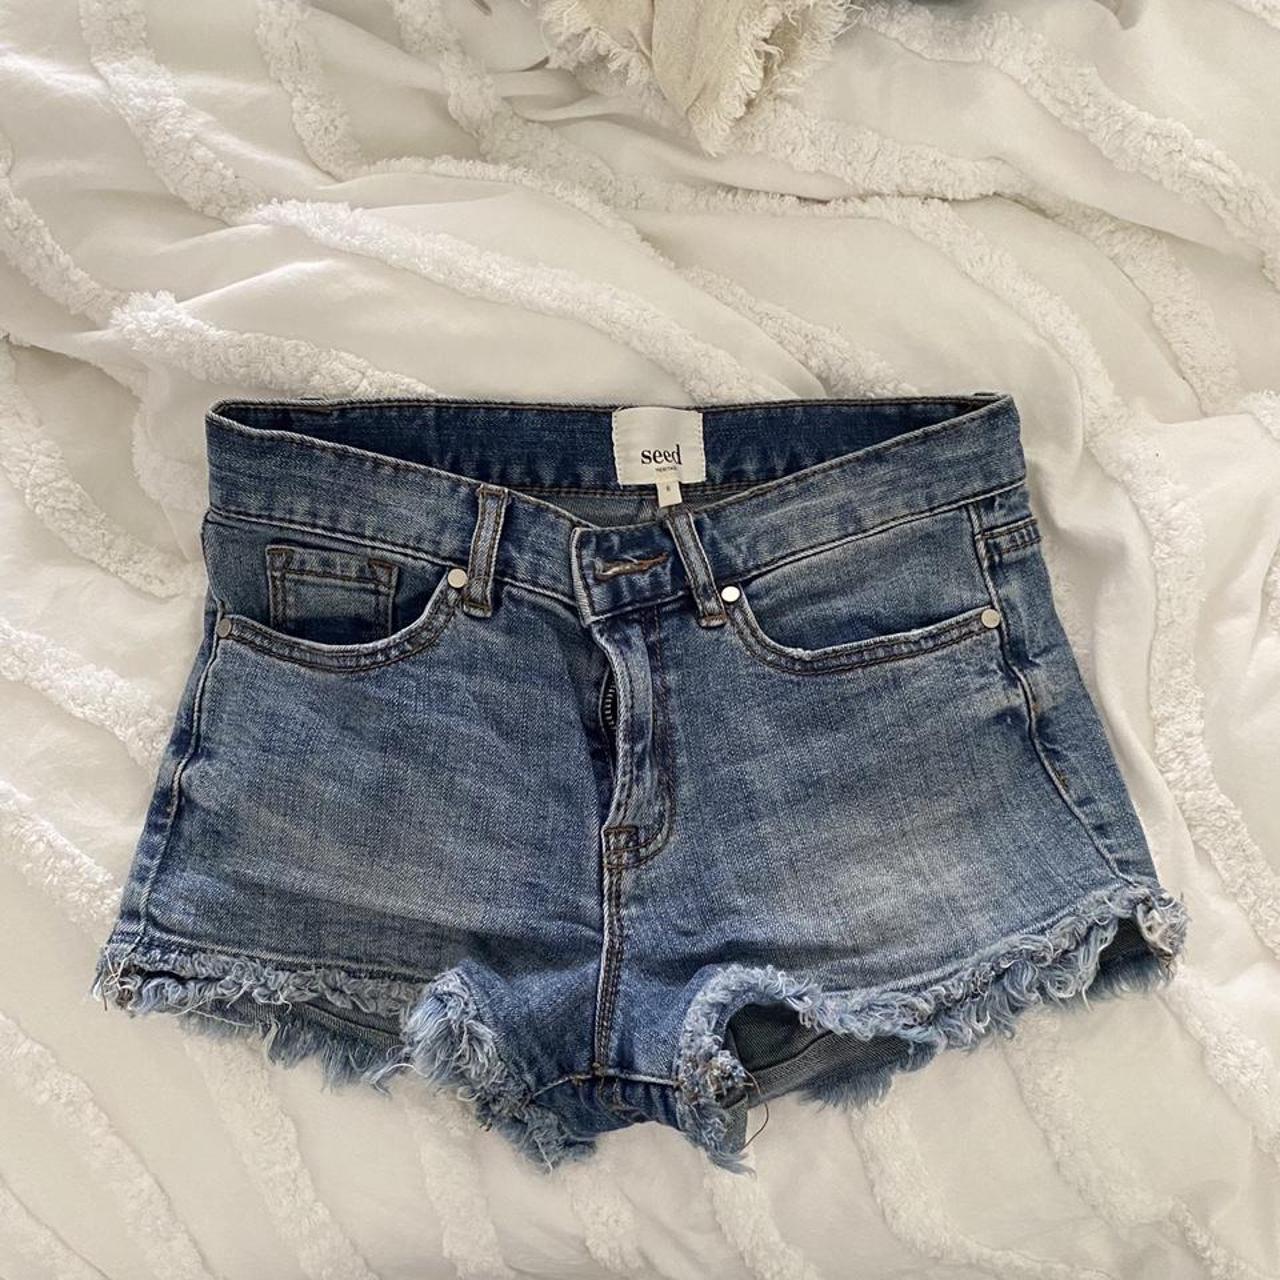 Low waisted denim shorts Perfect for... - Depop